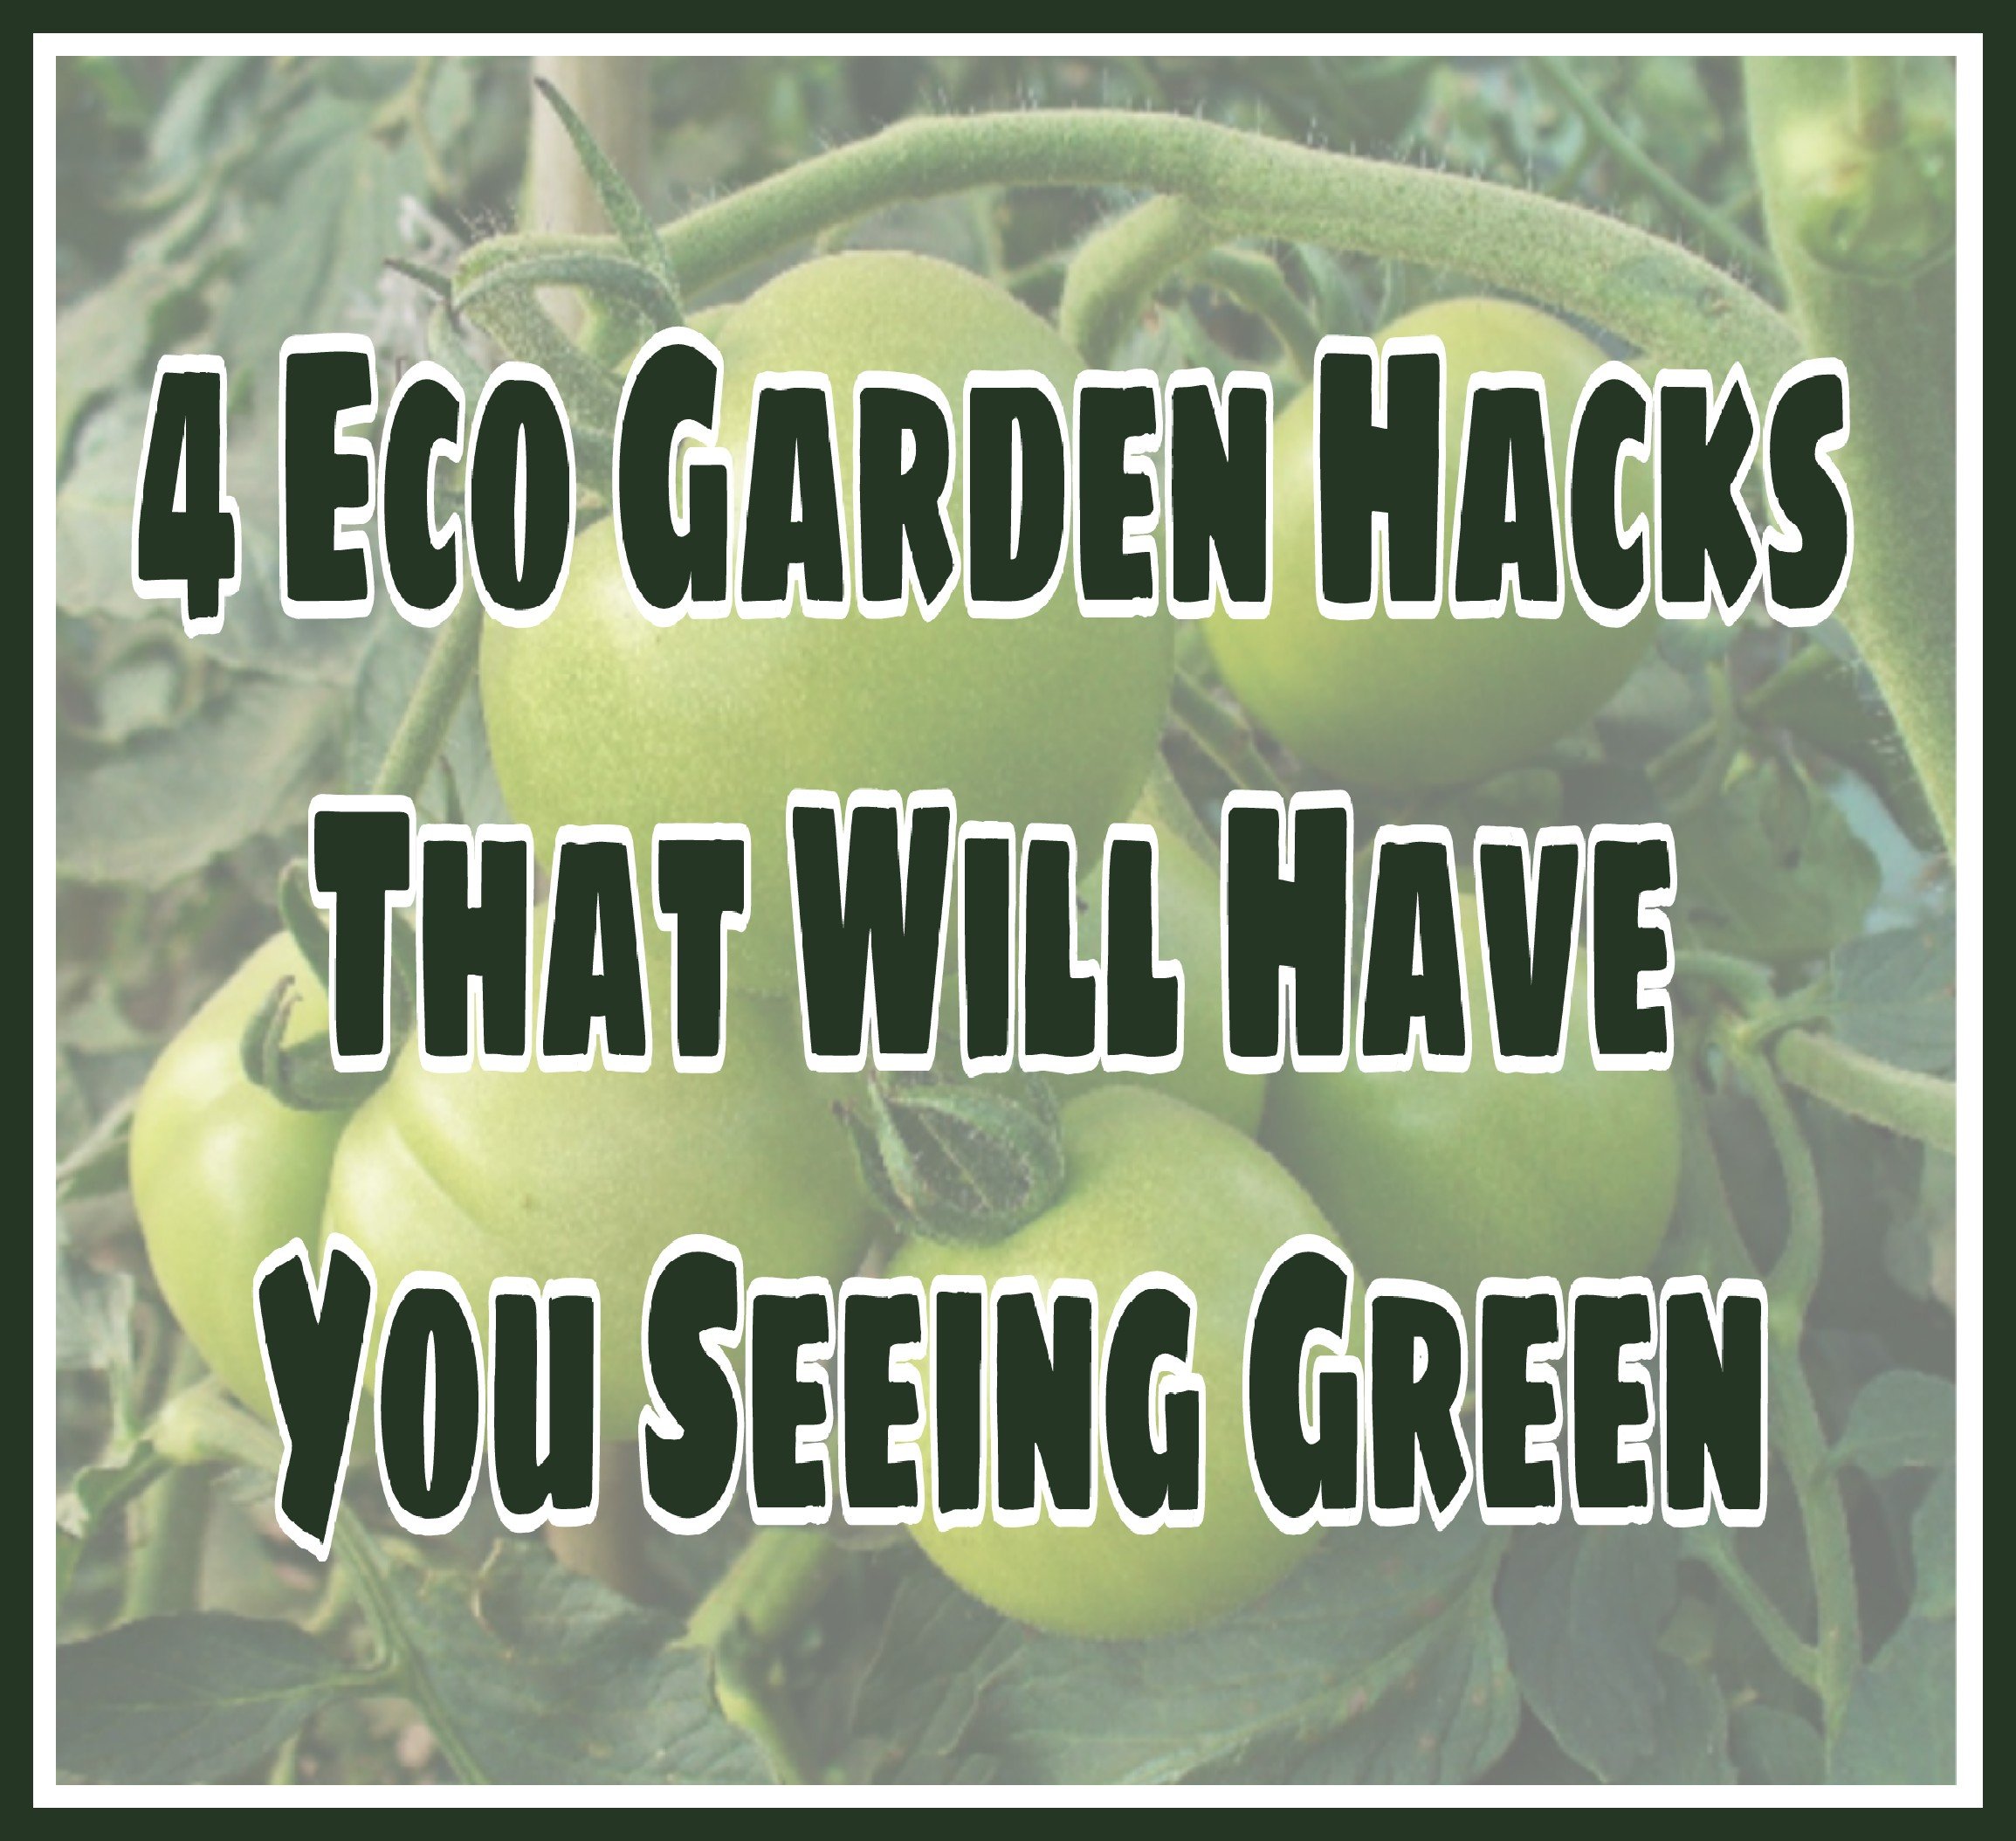 4 Eco Garden Hacks That Will Have You Seeing Green title on faded background image